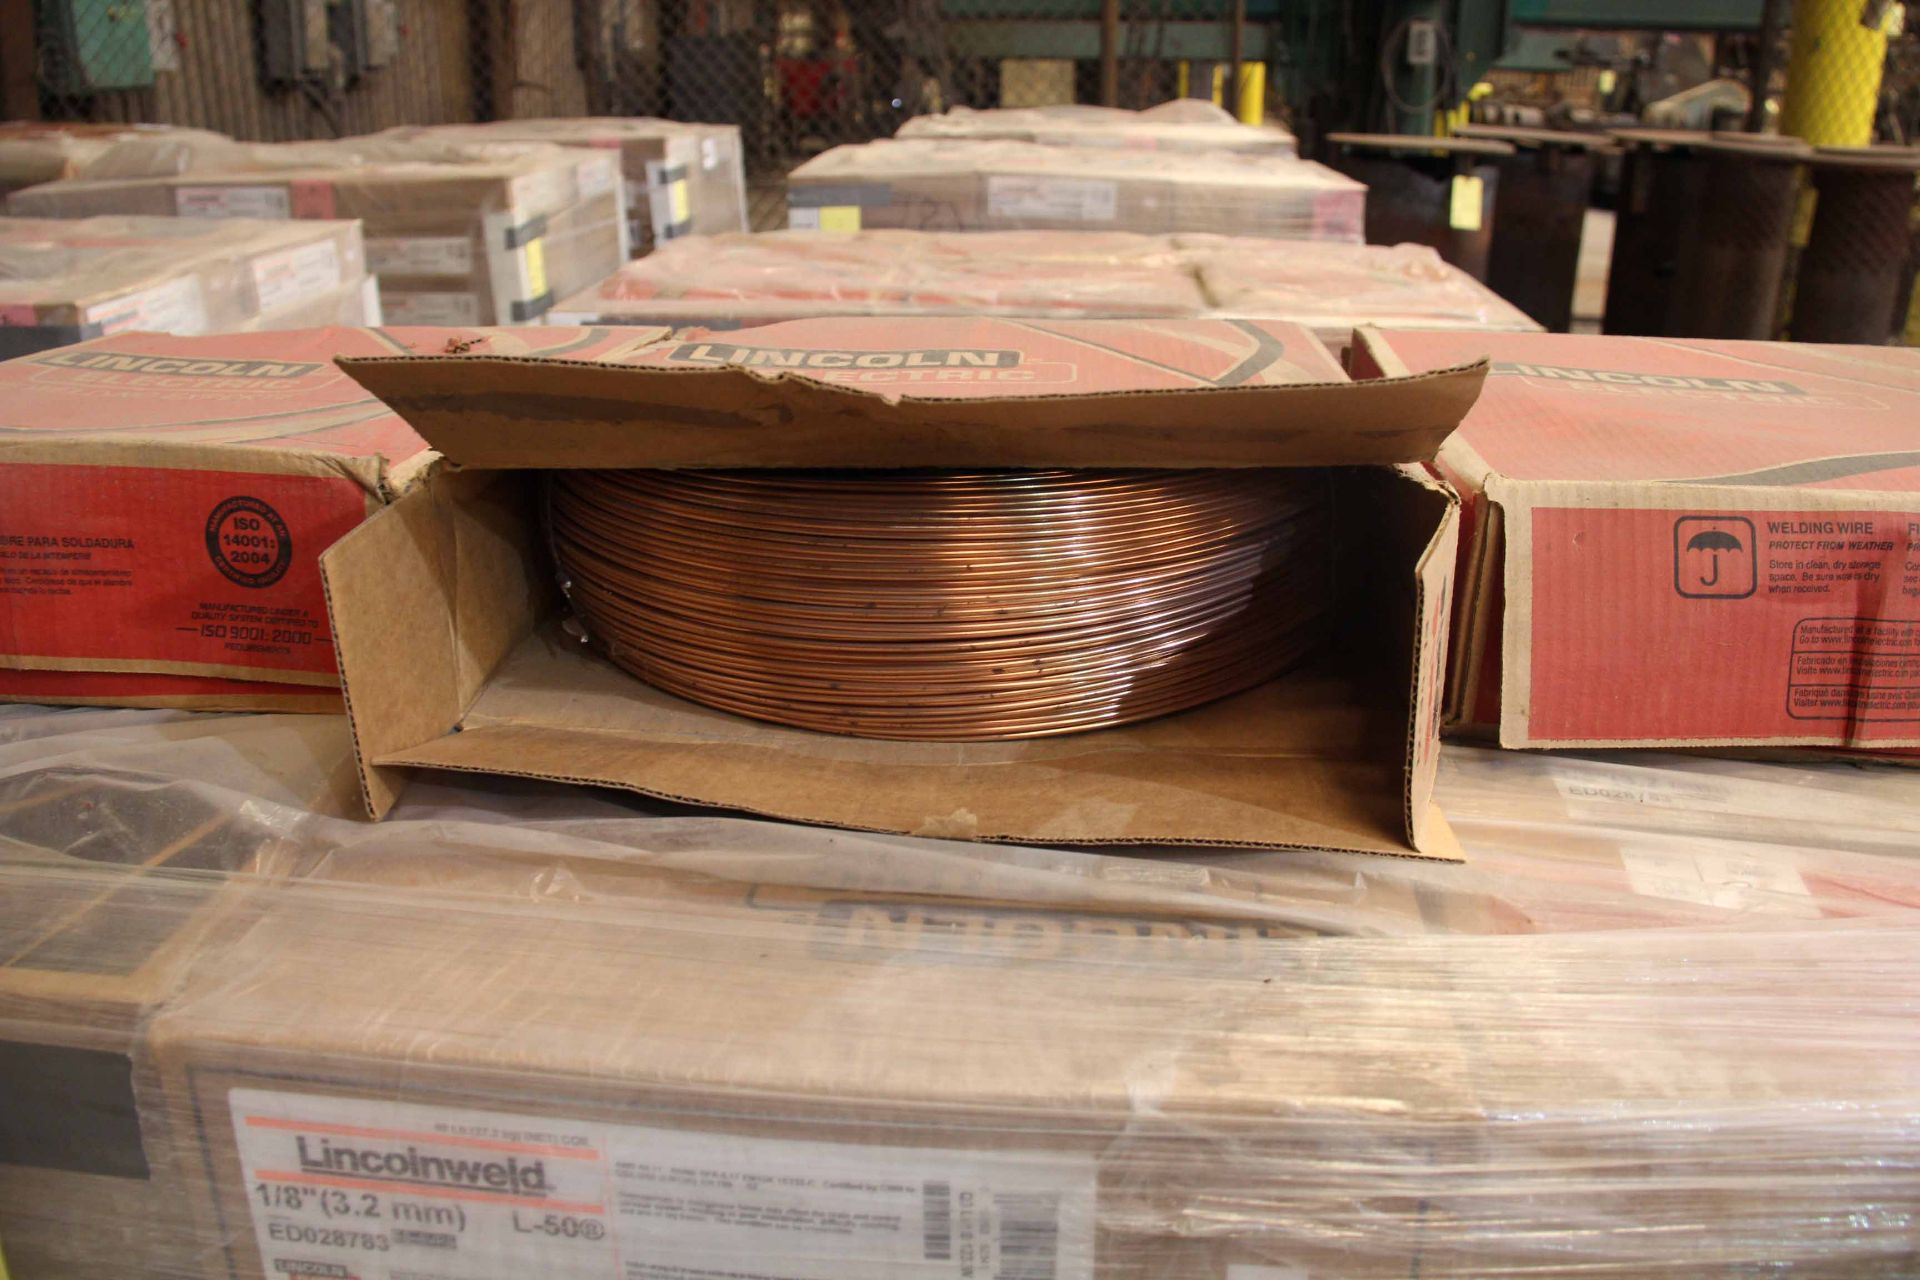 LOT OF WELDING WIRE, LINCOLN MDL. L-50, 1/8" (3.2mm) (57 boxes - 60 lbs. ea.) (on one pallet) - Image 2 of 2